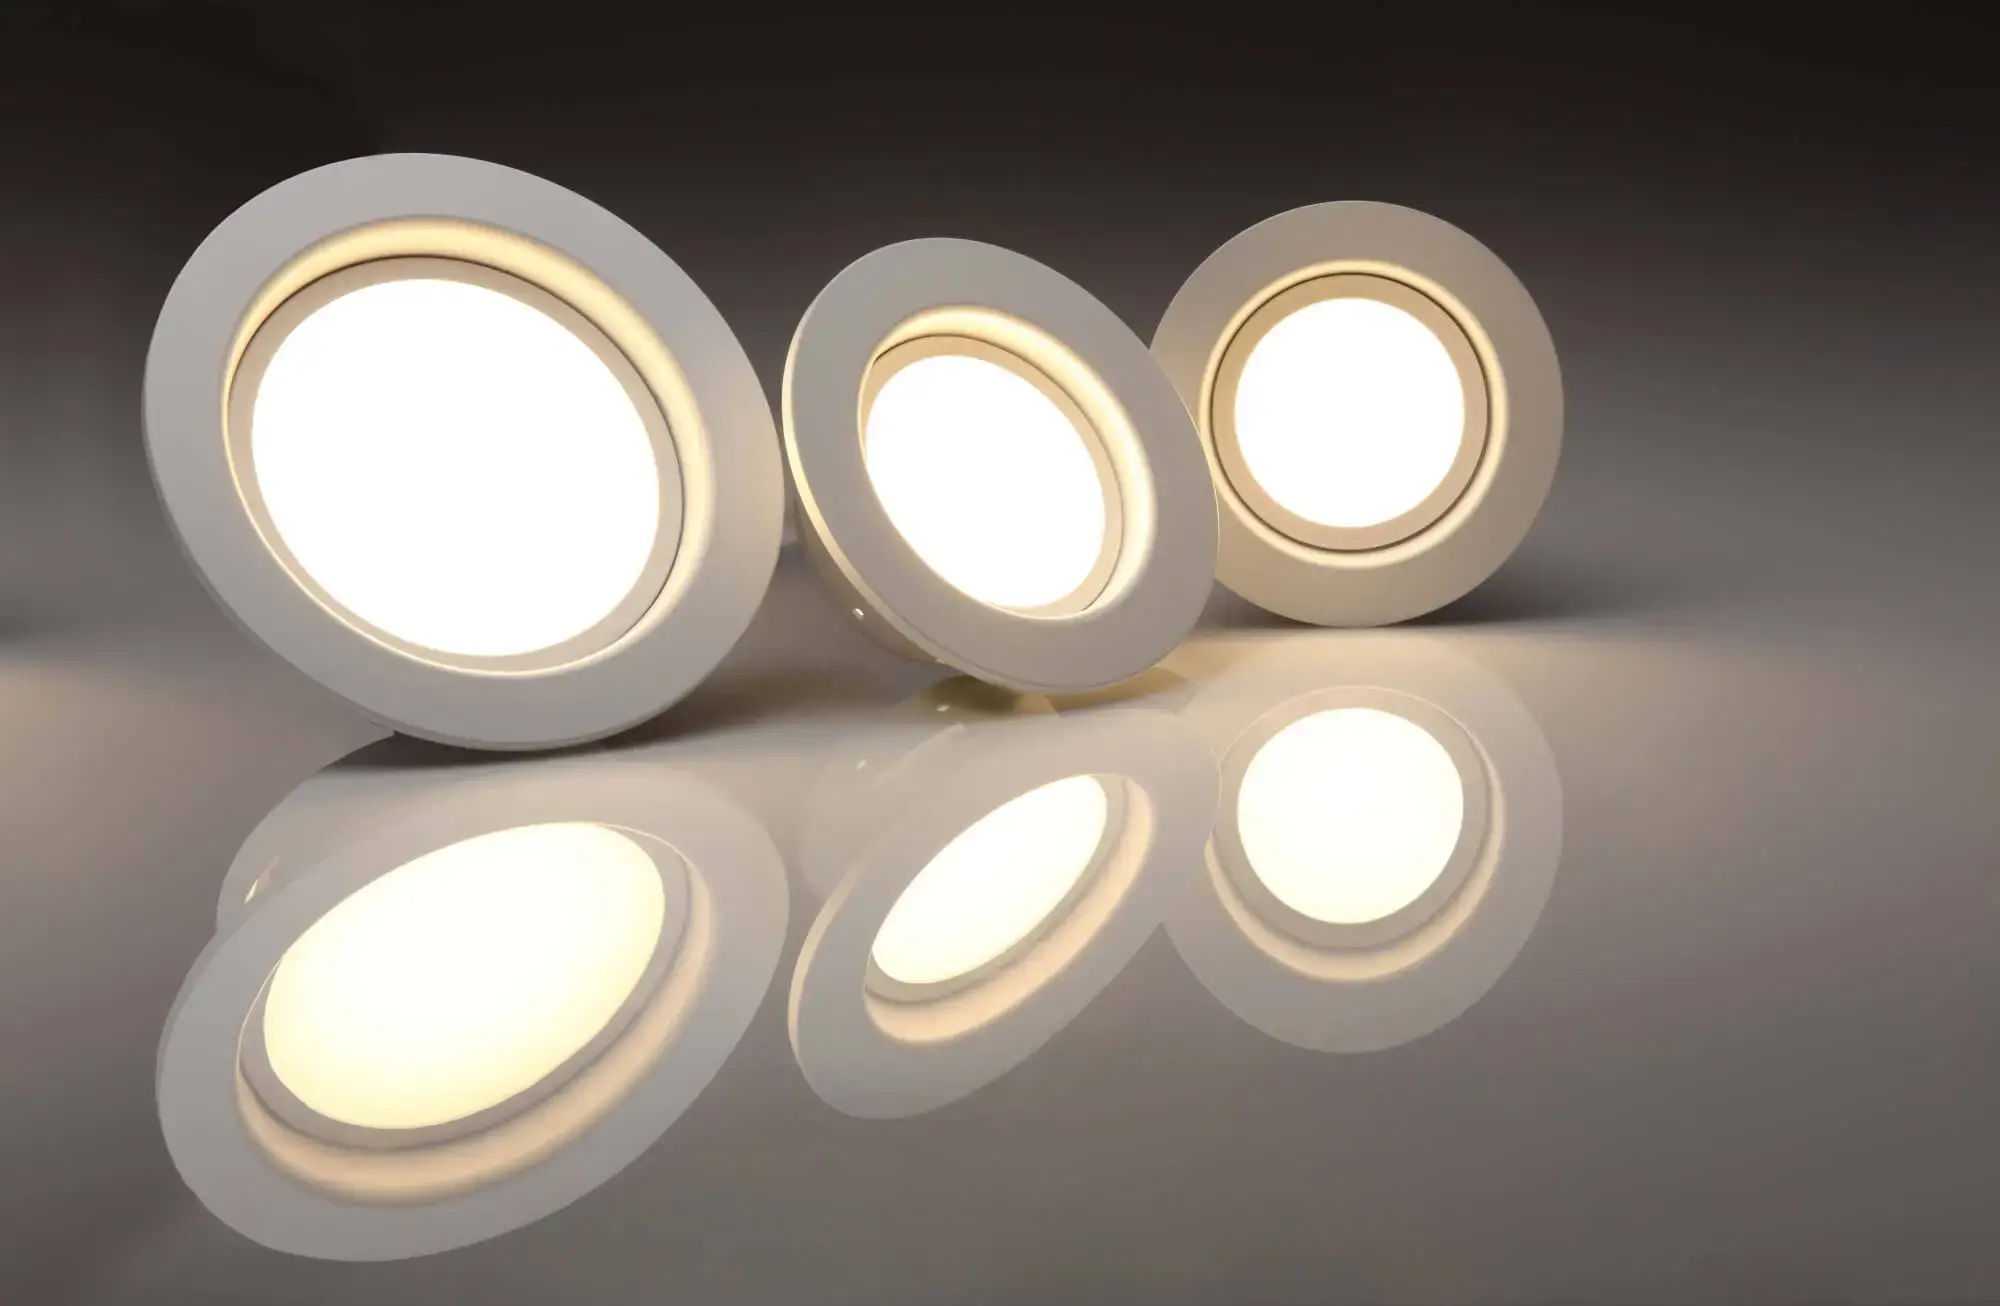 How To Replace Your Lights With Equivalent LEDs